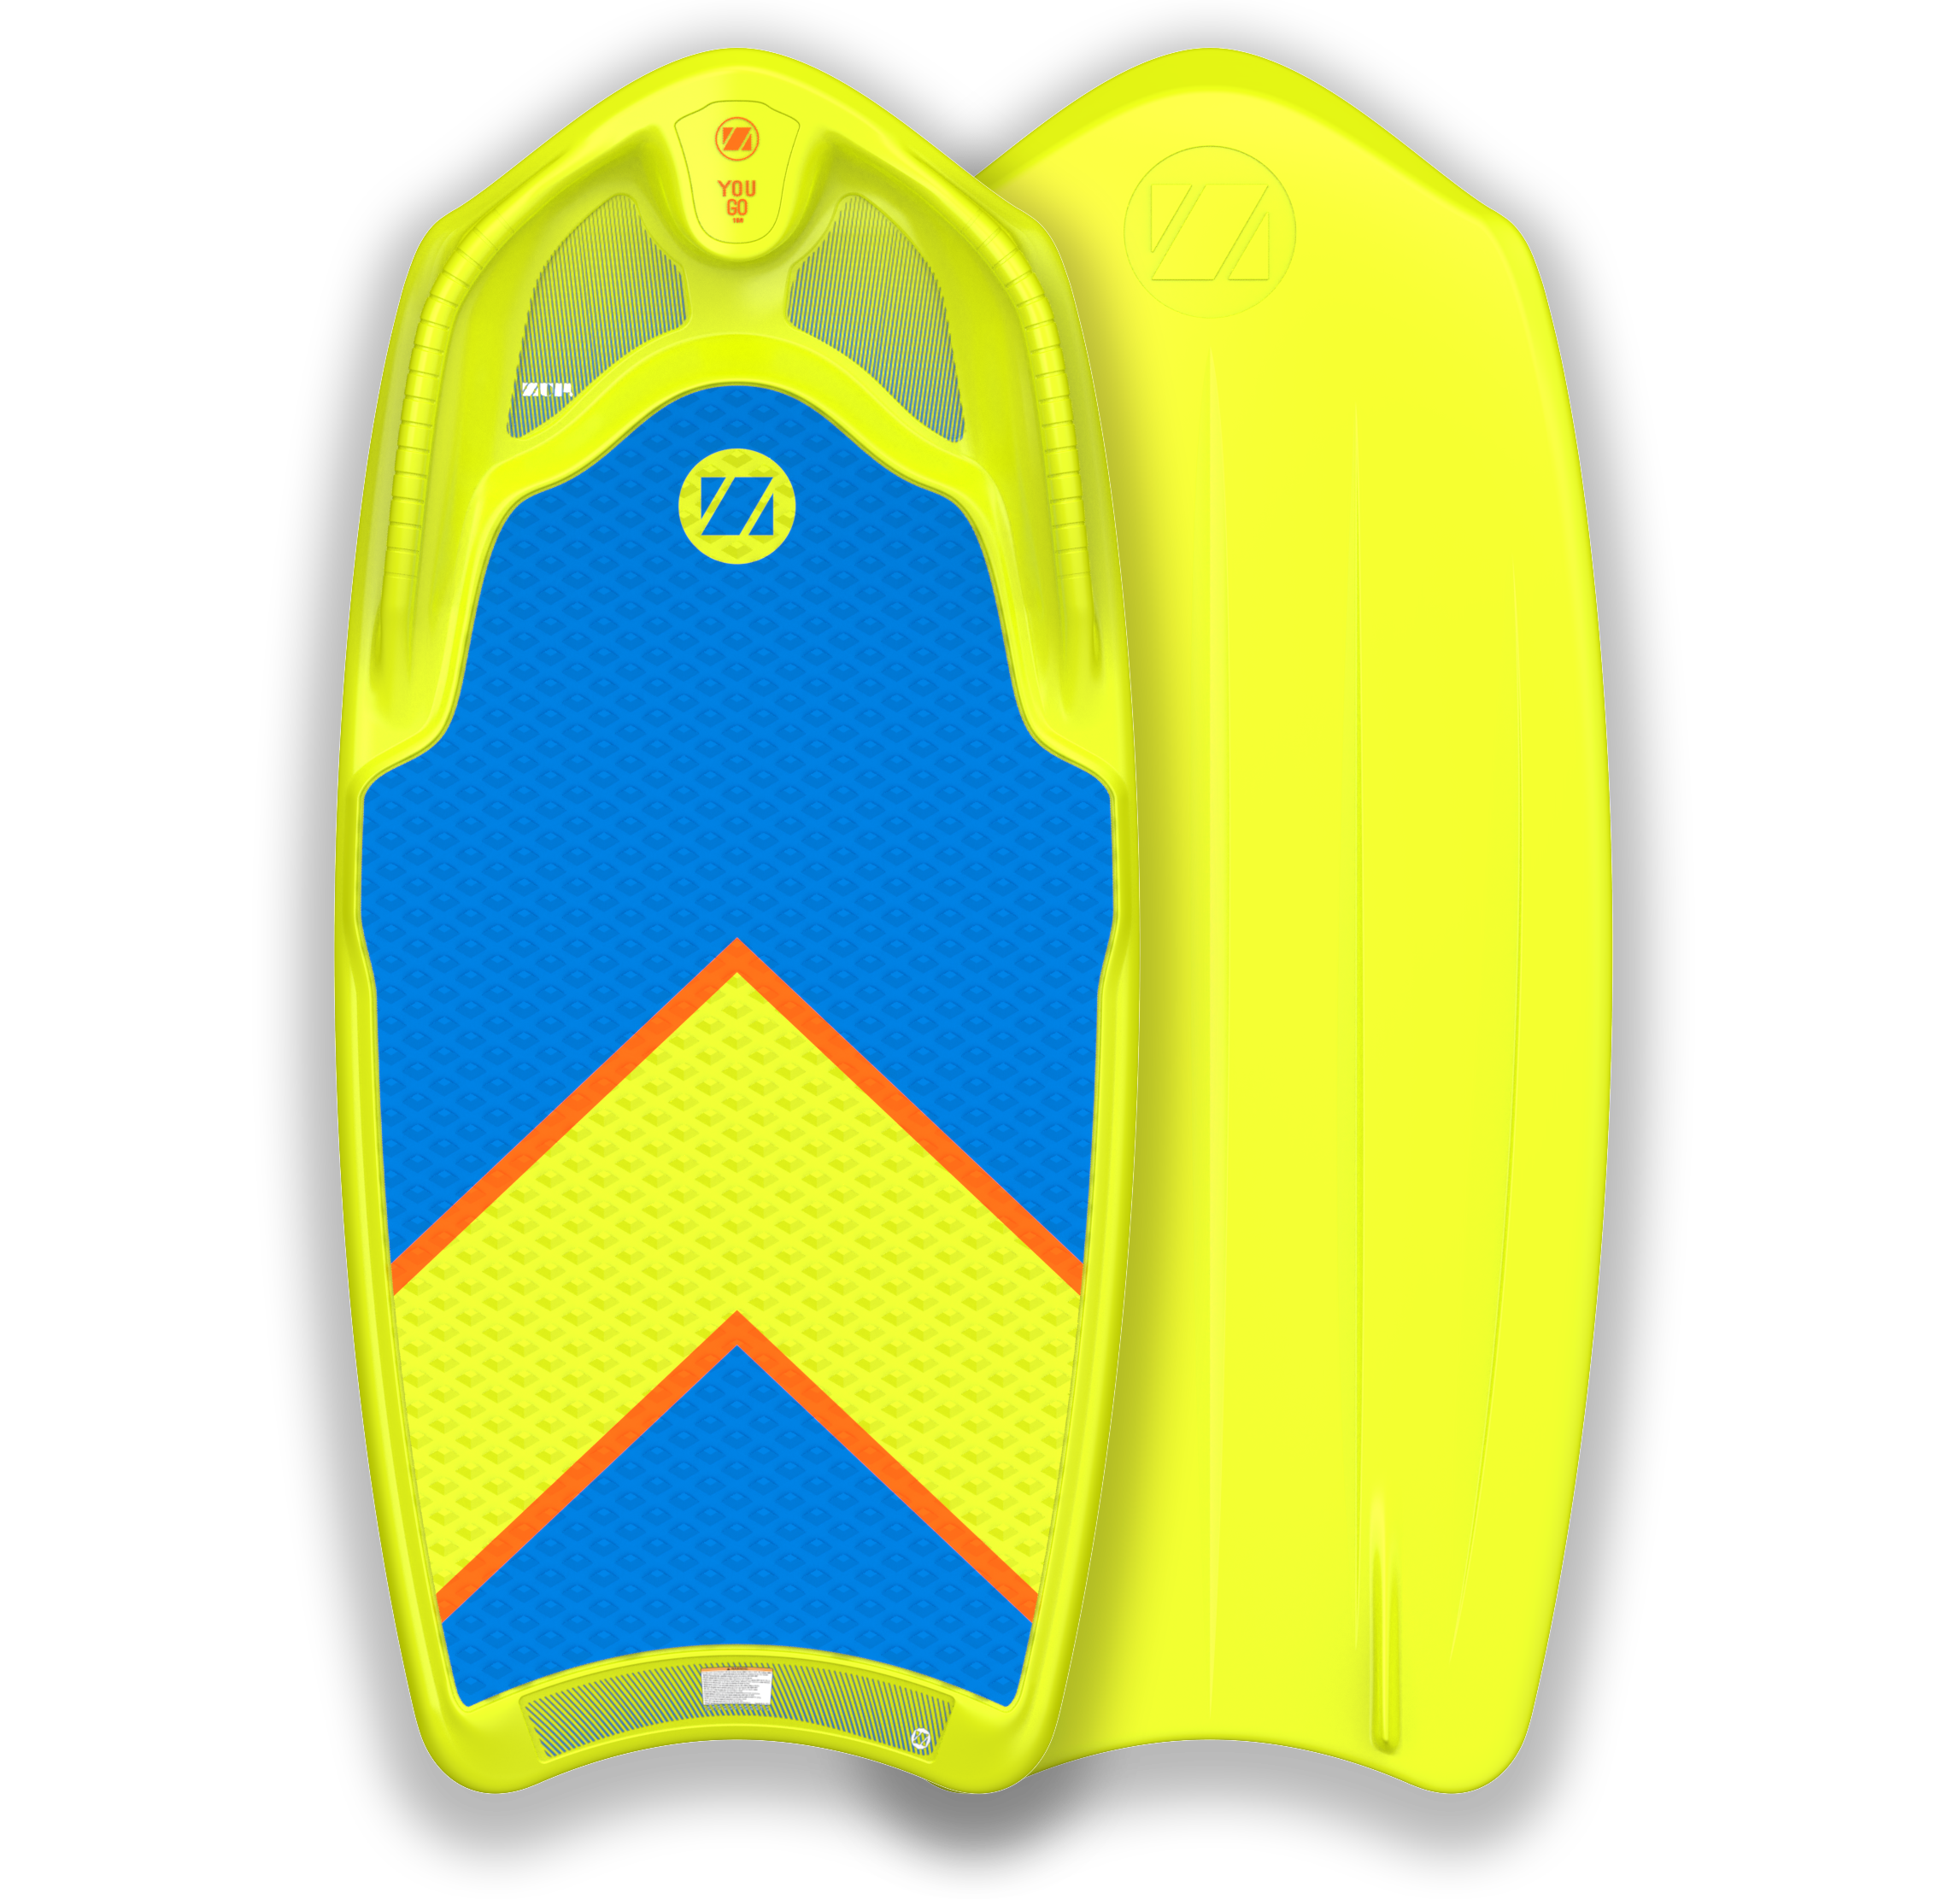 ZUP YouGo 160 Multisport Board with DoubleZup Rope Included